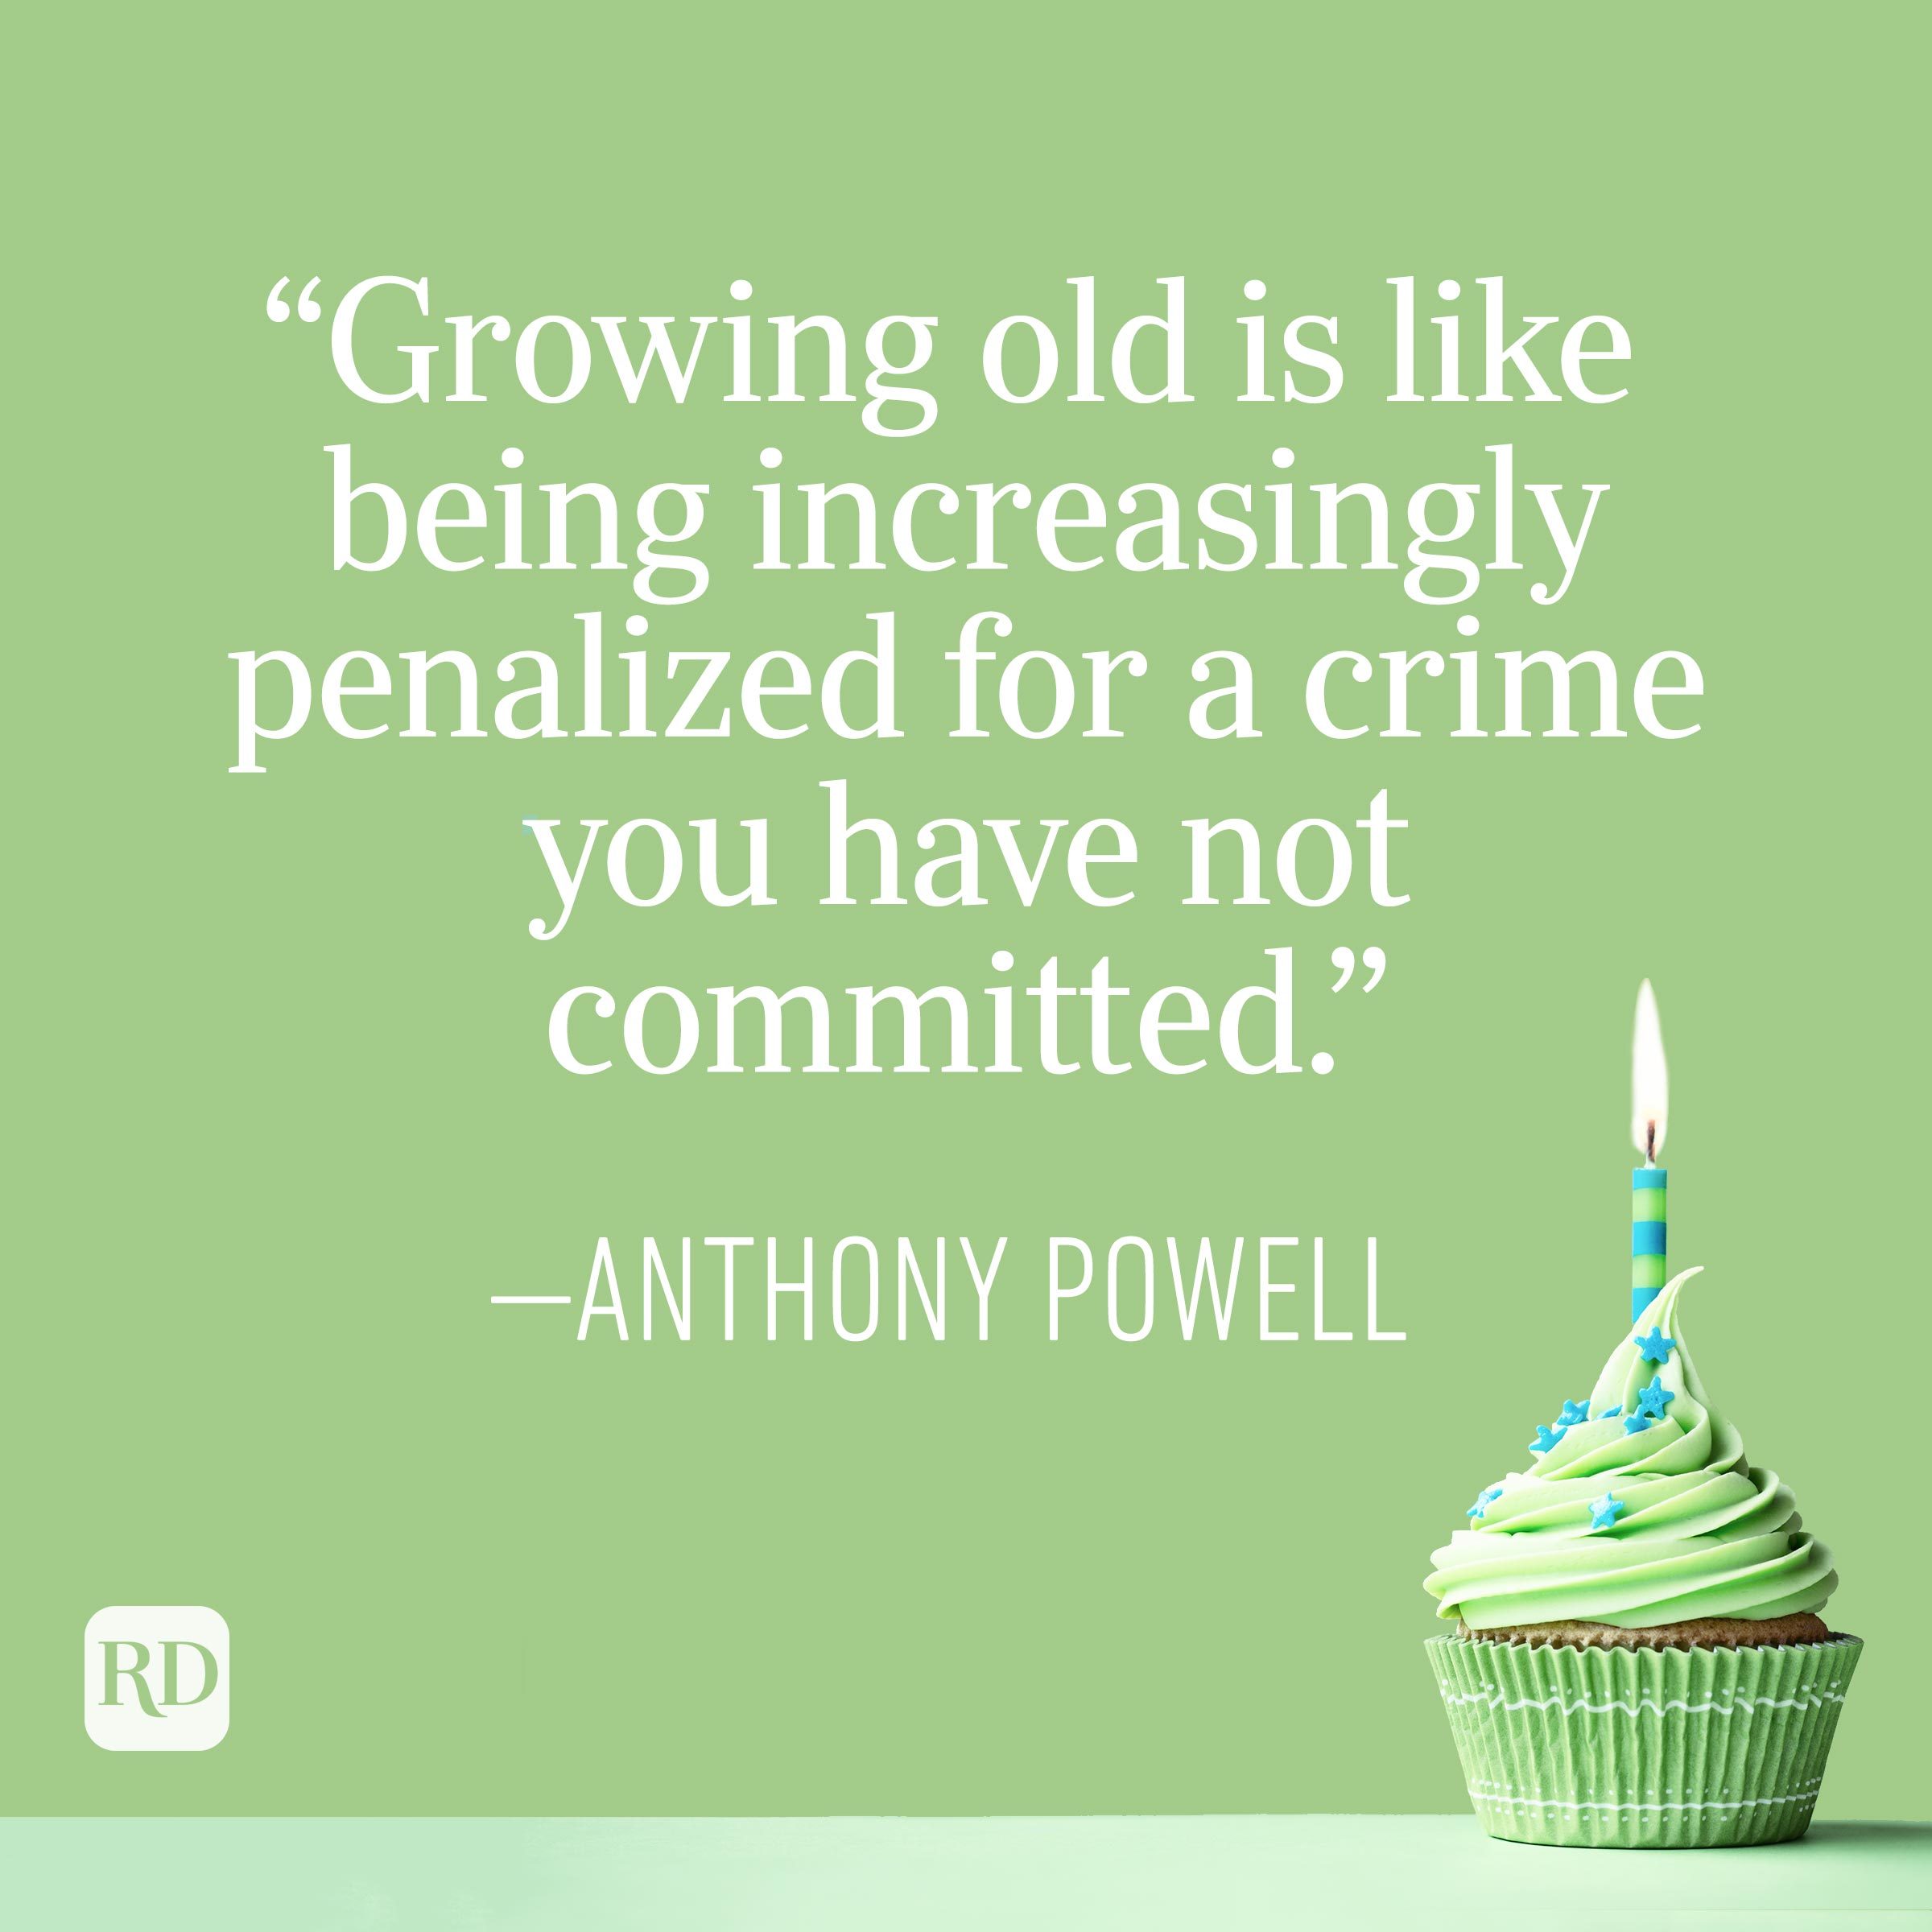 "Growing old is like being increasingly penalized for a crime you have not committed." —Anthony Powell